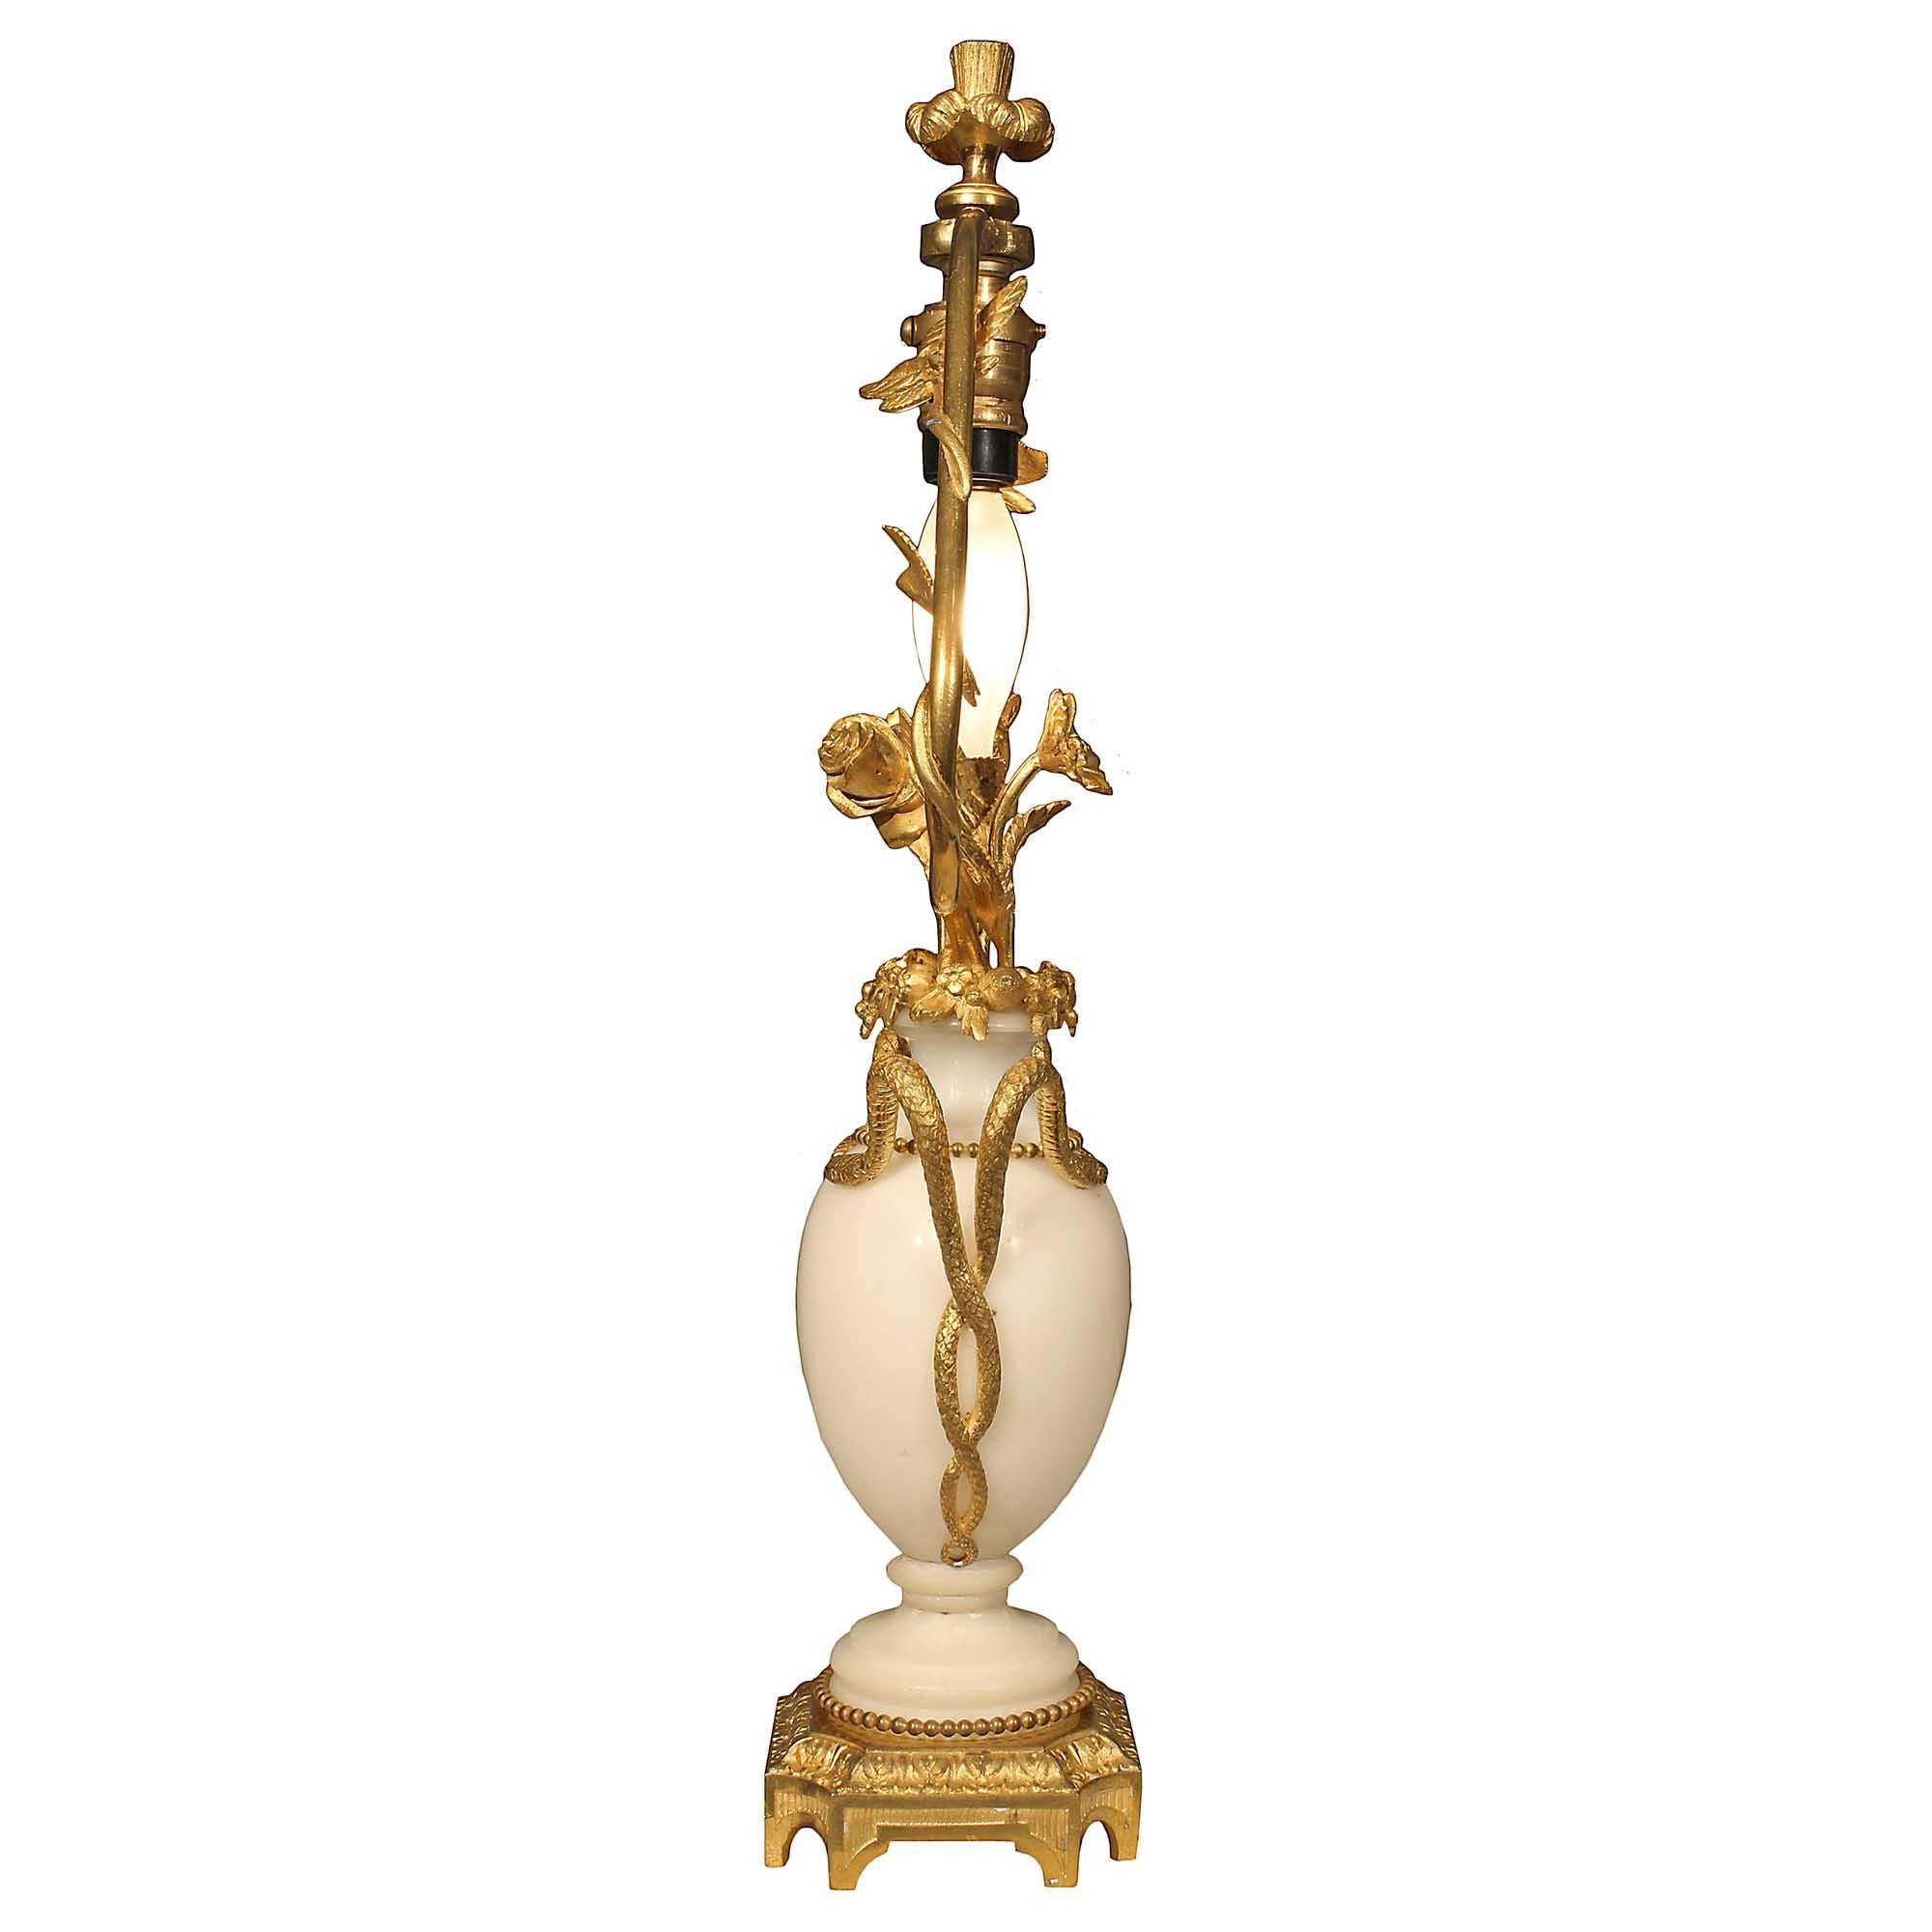 A charming French 19th century Louis XVI st. small scale white Carrera marble and ormolu lamp. The lamp is raised on a square ormolu base with concave corners, a fluted and coeur pattern in a satin and burnished finish. The white Carrara marble body